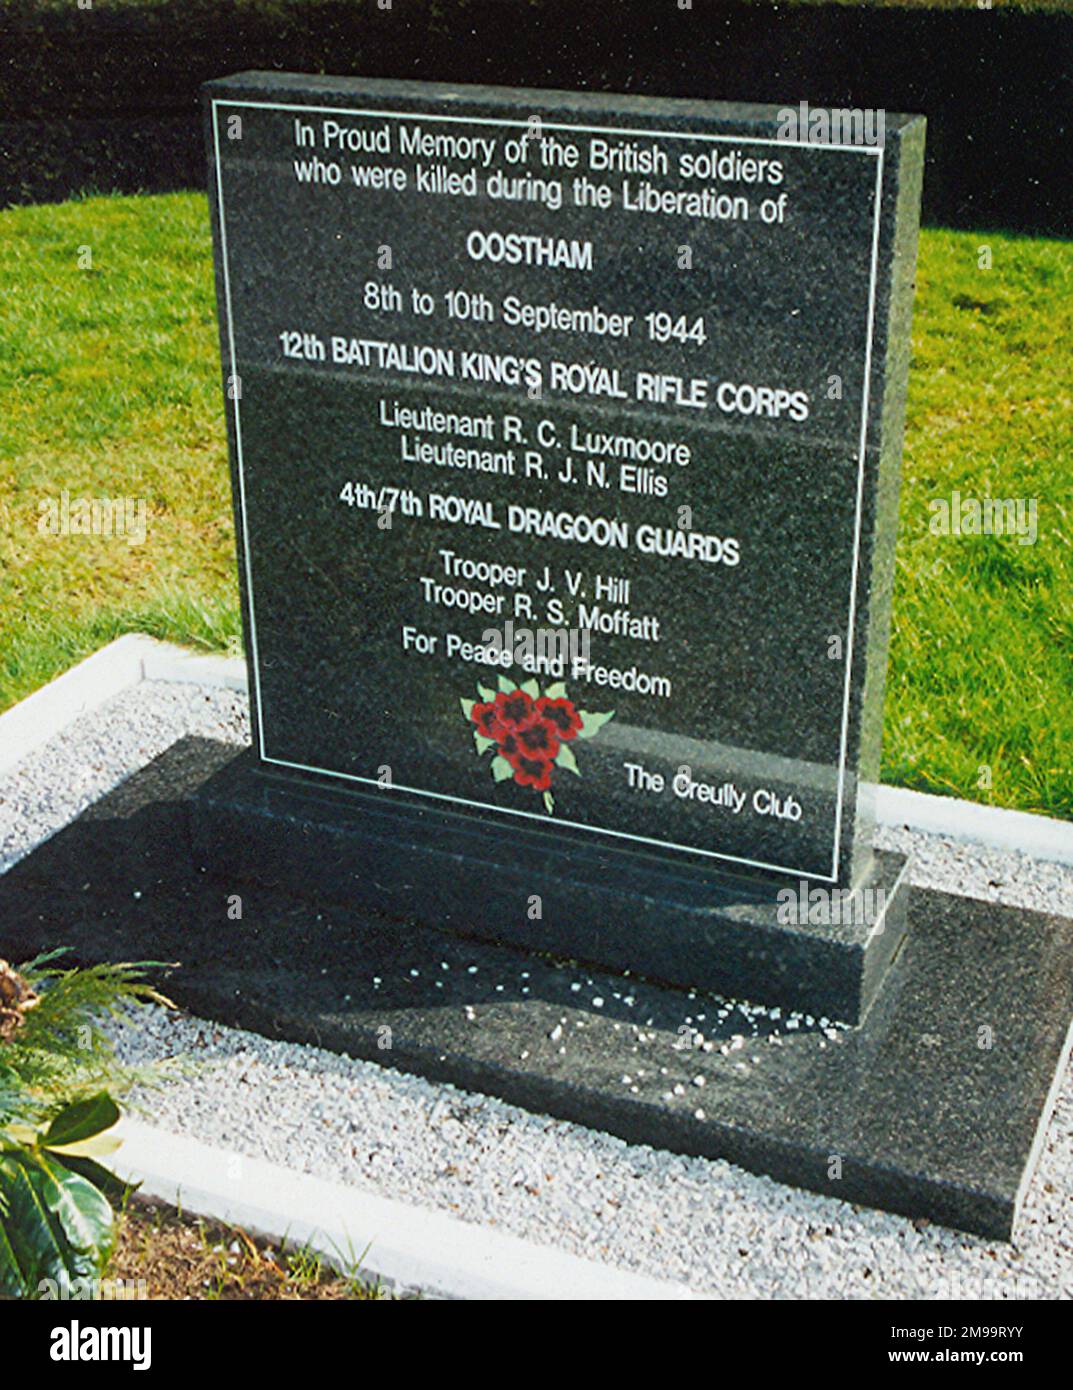 This black polished granite Memorial was raised in September 2000 at the instigation of local historian Carl Reymen, the town council and local history society in co-operation with the regiments concerned in the battle for the village - Oostham. It commemorates the soldiers killed in the figting to liberate Oostham, carries the legend 'For Peace and Freedom', bears an engraved poppy spray andi is signed 'The Creully Club'. The fighting began on the 8th September 1944 as the British advanced northwards beyond the Albert Canal and met the German 3rd Squadron Panzerjager Abteilung. By nightfall Stock Photo